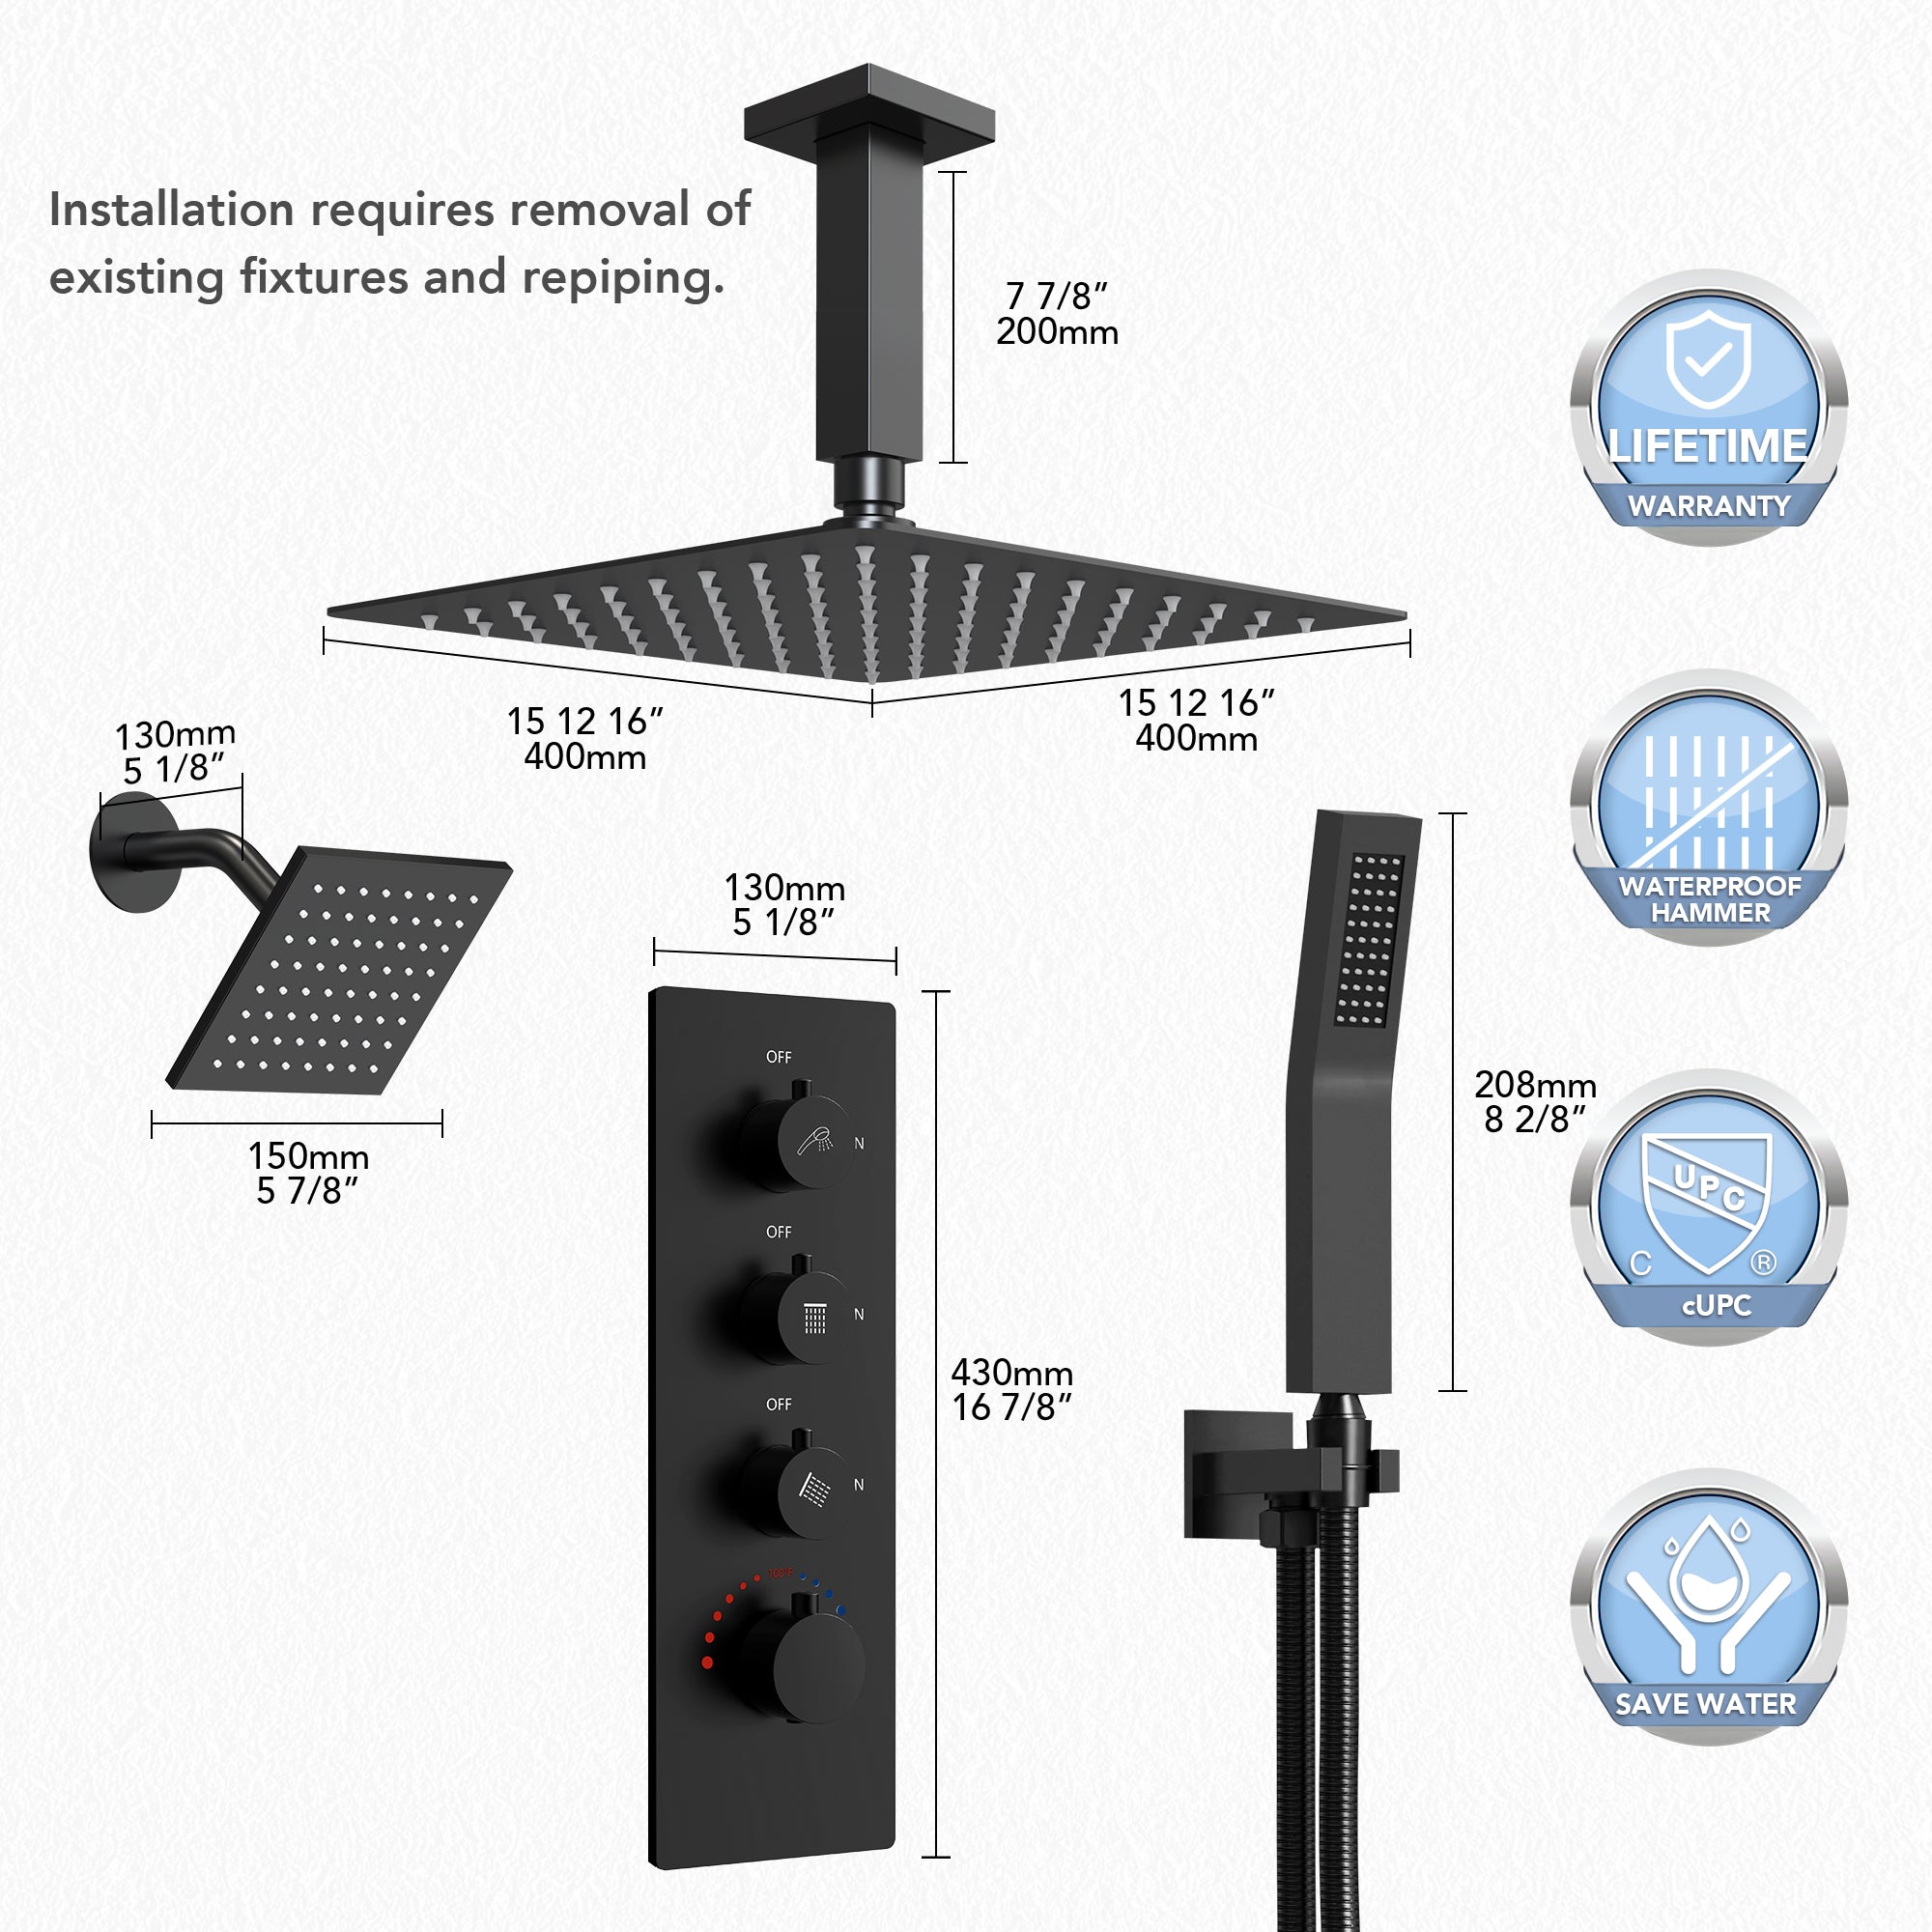 EVERSTEIN SFS-1061-BK16 16" High-Pressure Rainfall Complete Shower System with Rough-in Valve